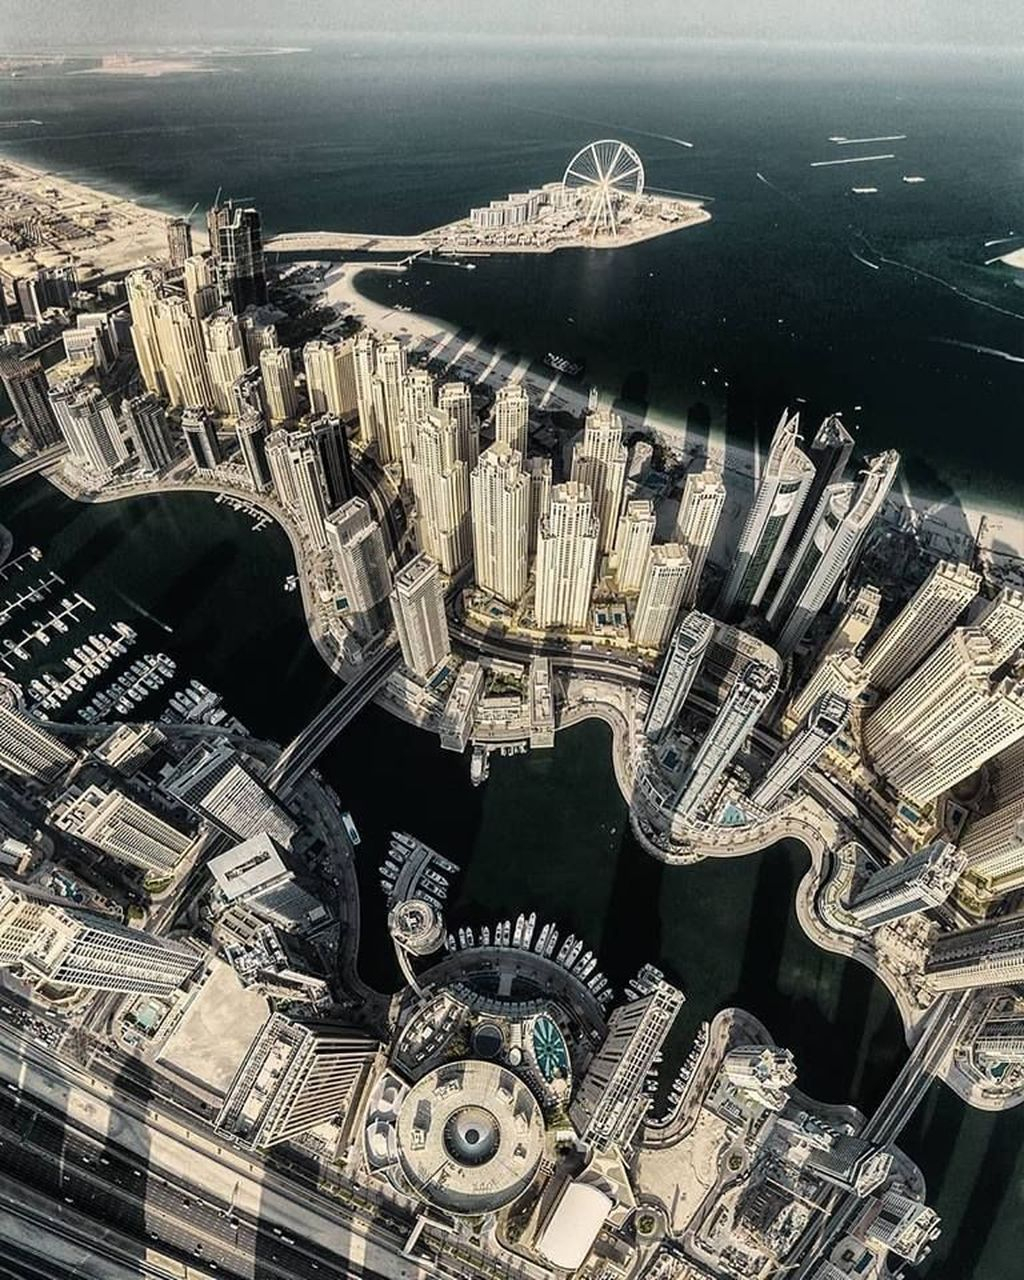 Awesome Photos Of Dubai To Make You Want To Visit It14